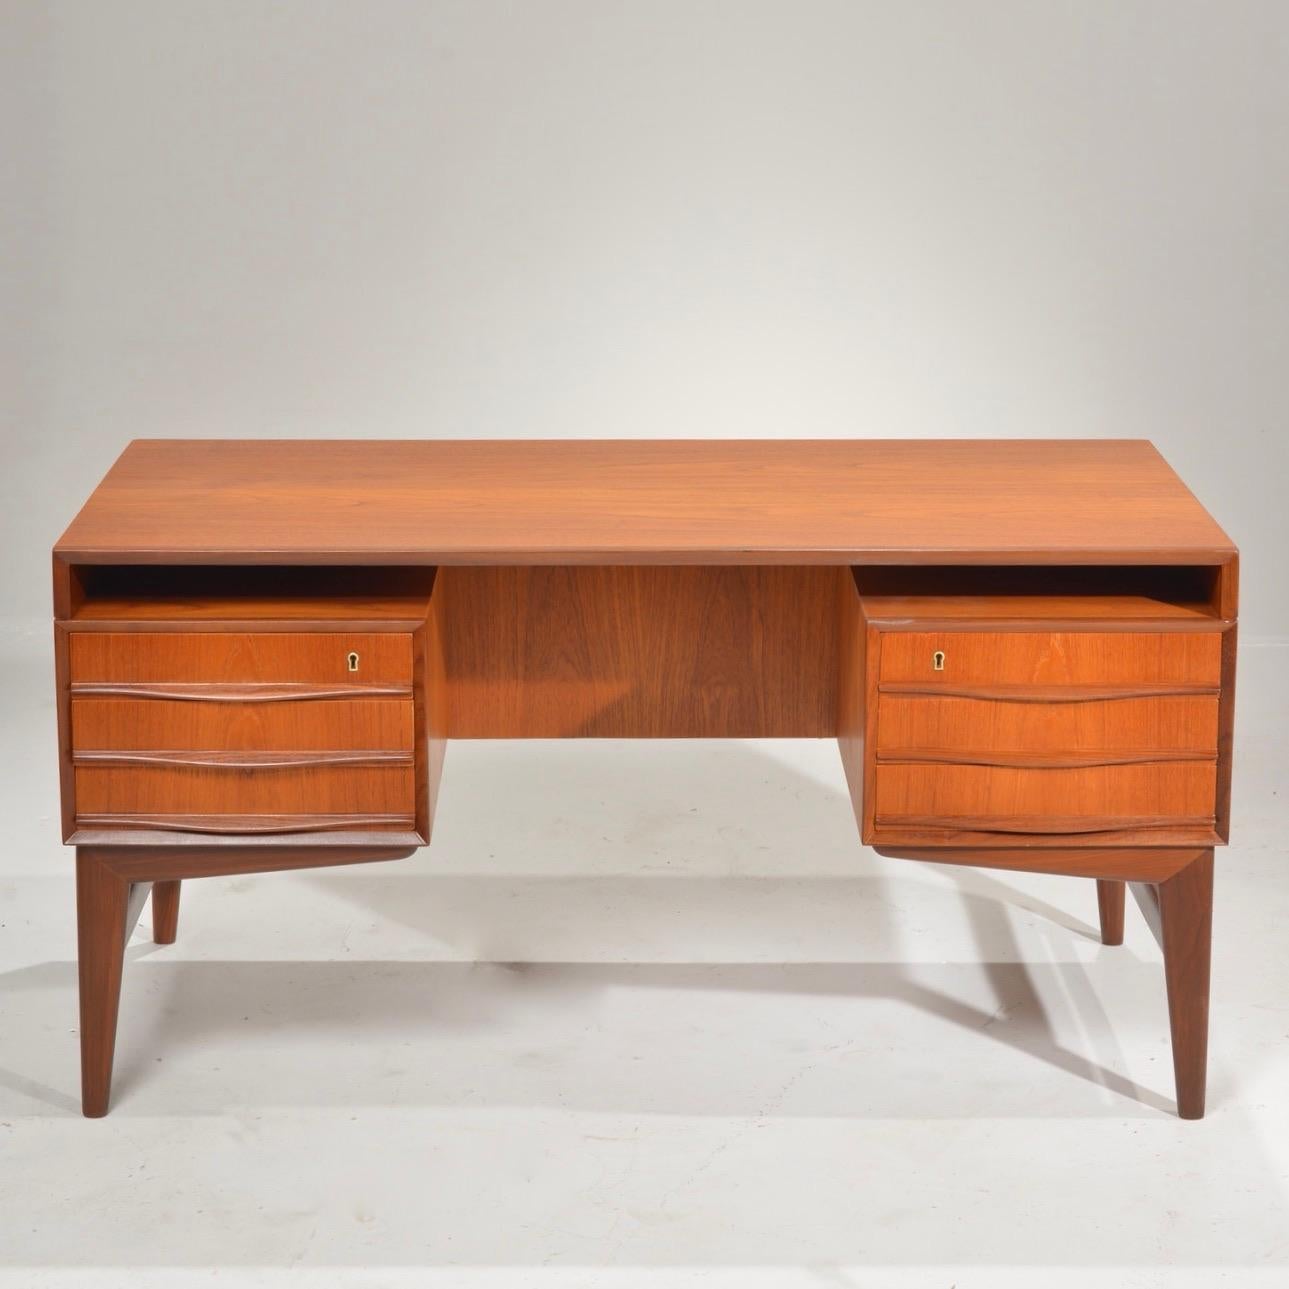 This is a great size desk by Sven Madsen.